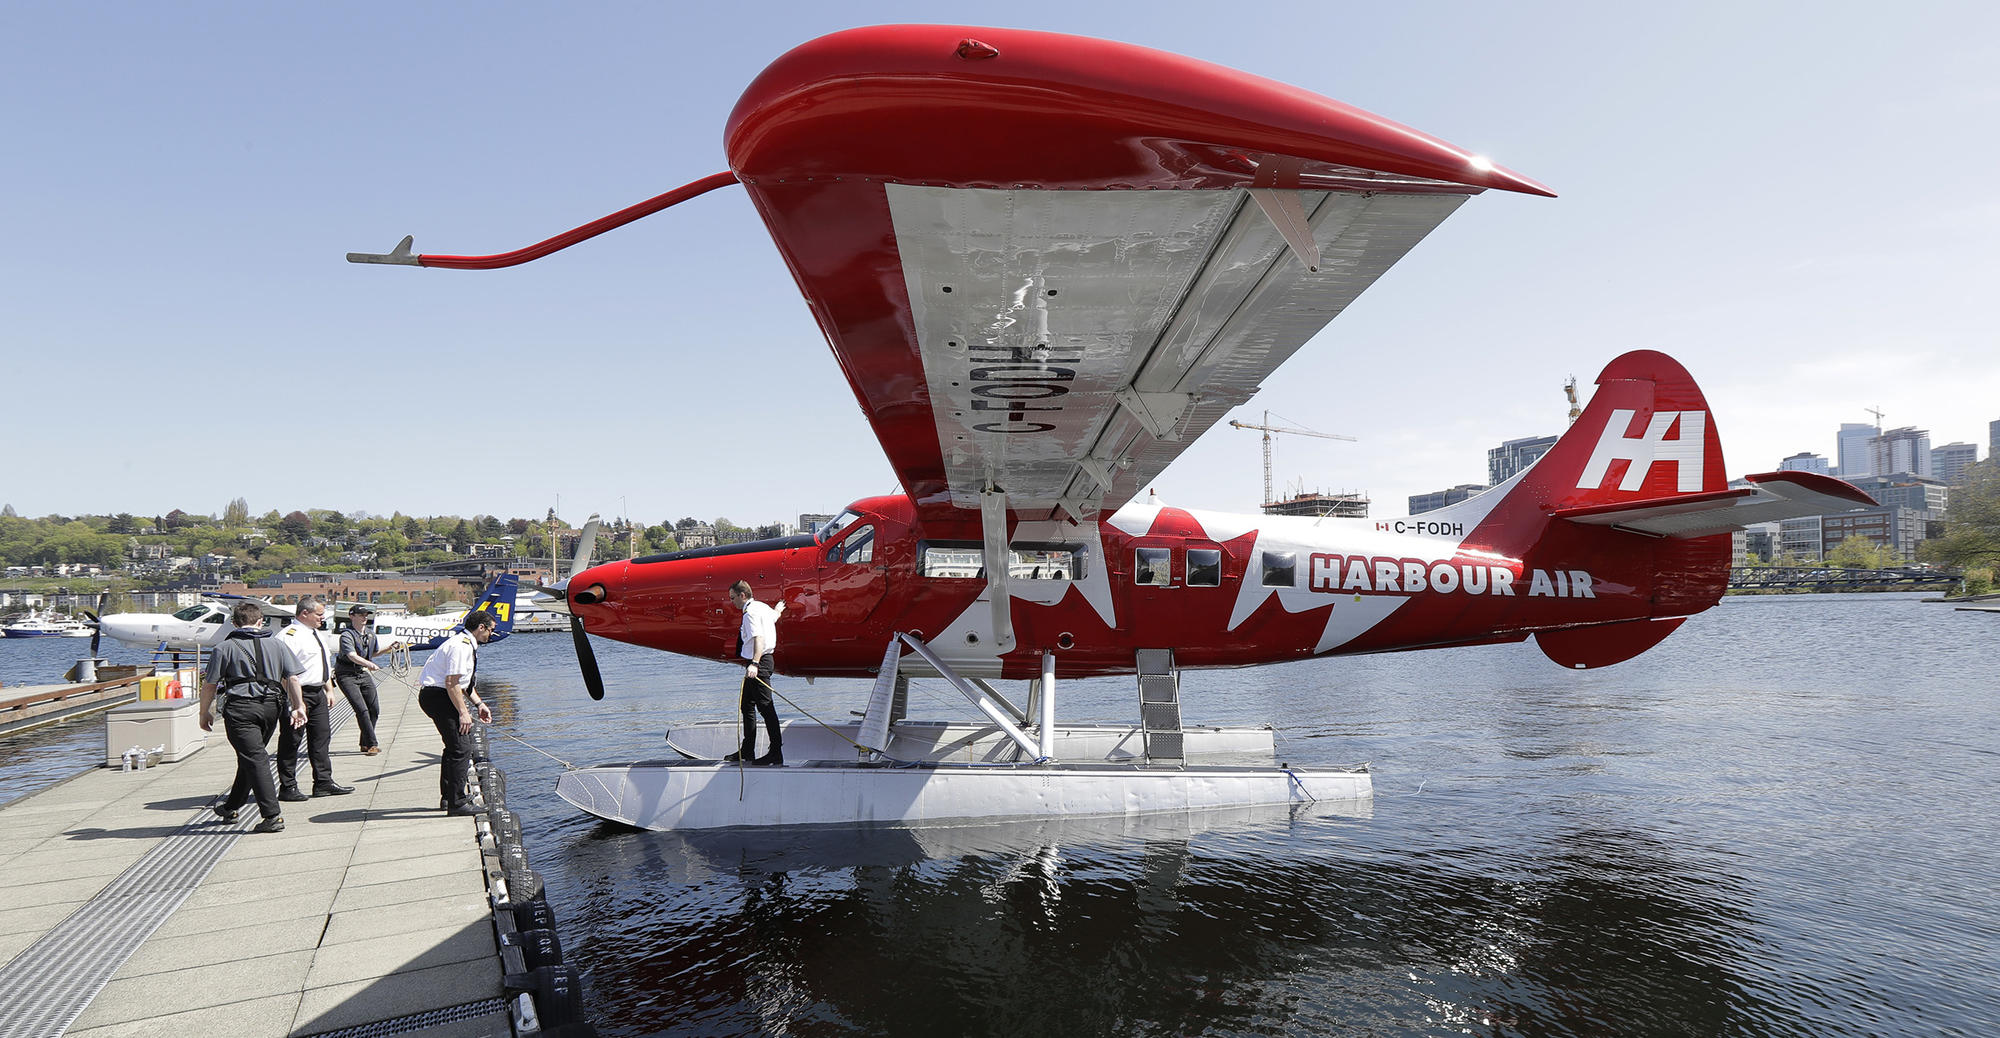 A Harbour Air seaplane is docked Wednesday, April 25, 2018, on Lake Union in Seattle. A partnership between Harbour Air and Kenmore Air will start offering direct one-hour seaplane flights between downtown Seattle and Vancouver, BC. (AP Photo/Ted S. Warren)